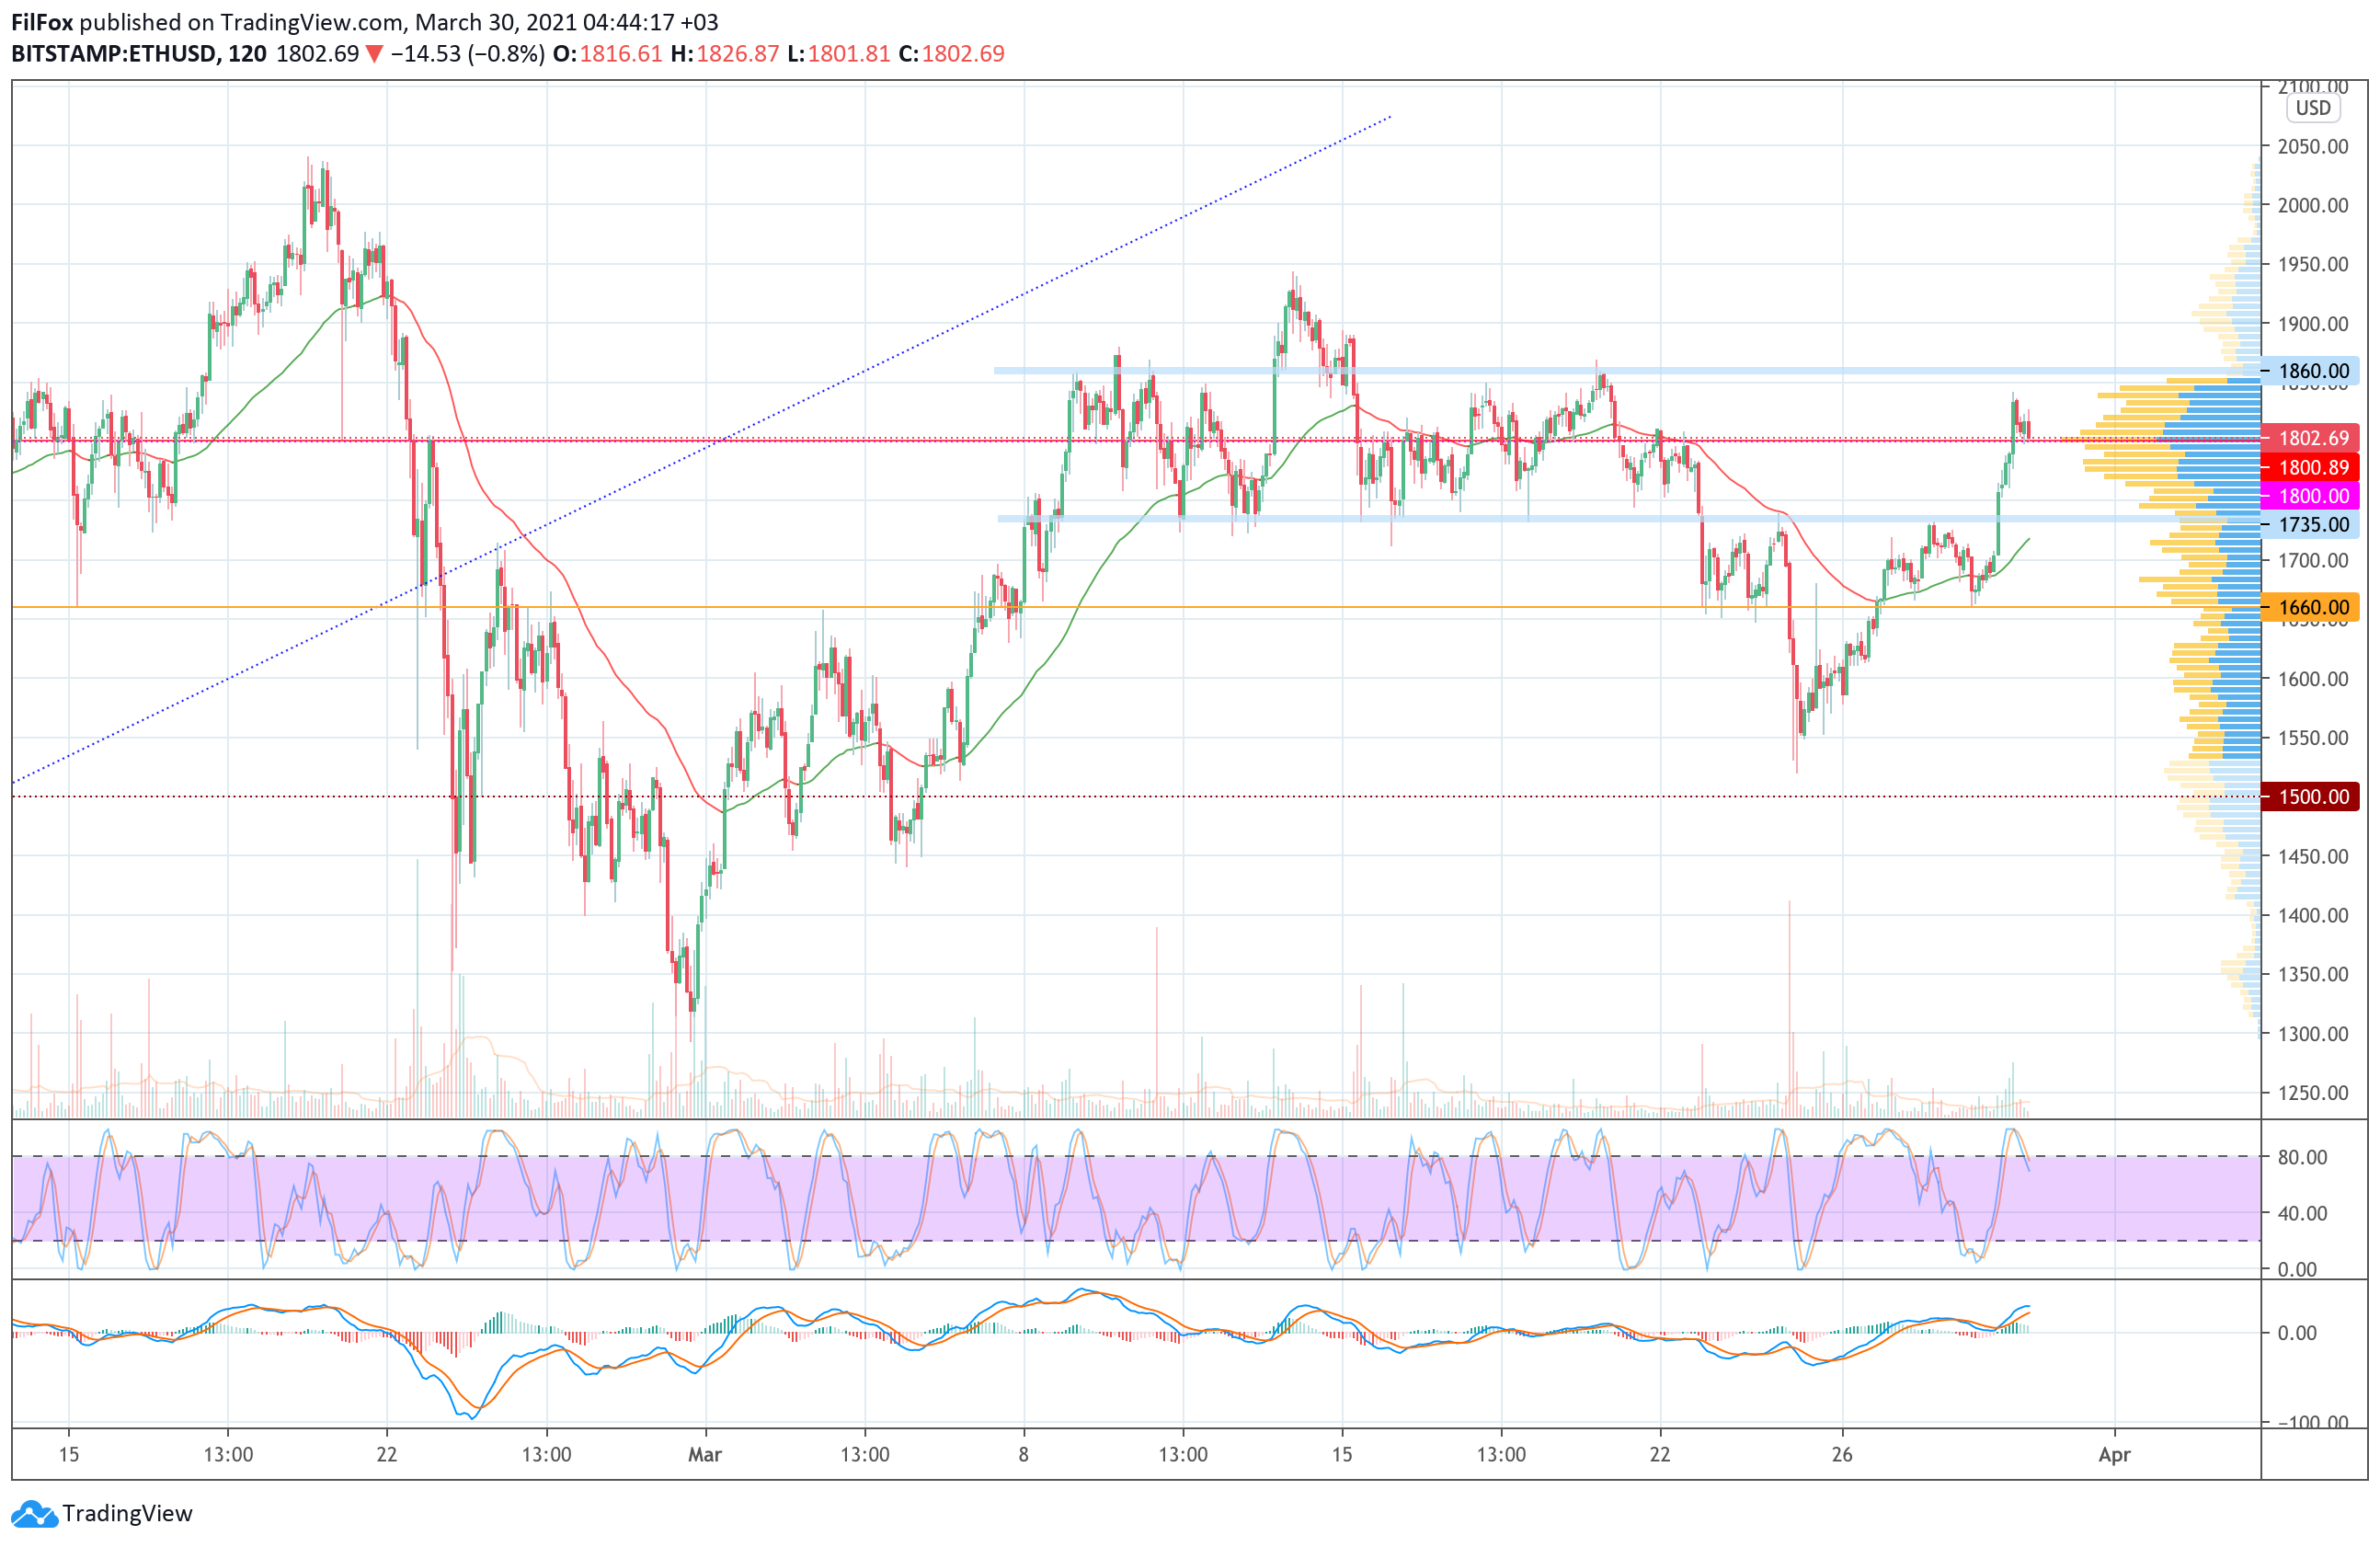 Analysis of prices for Bitcoin, Ethereum, XRP for 03/30/2021